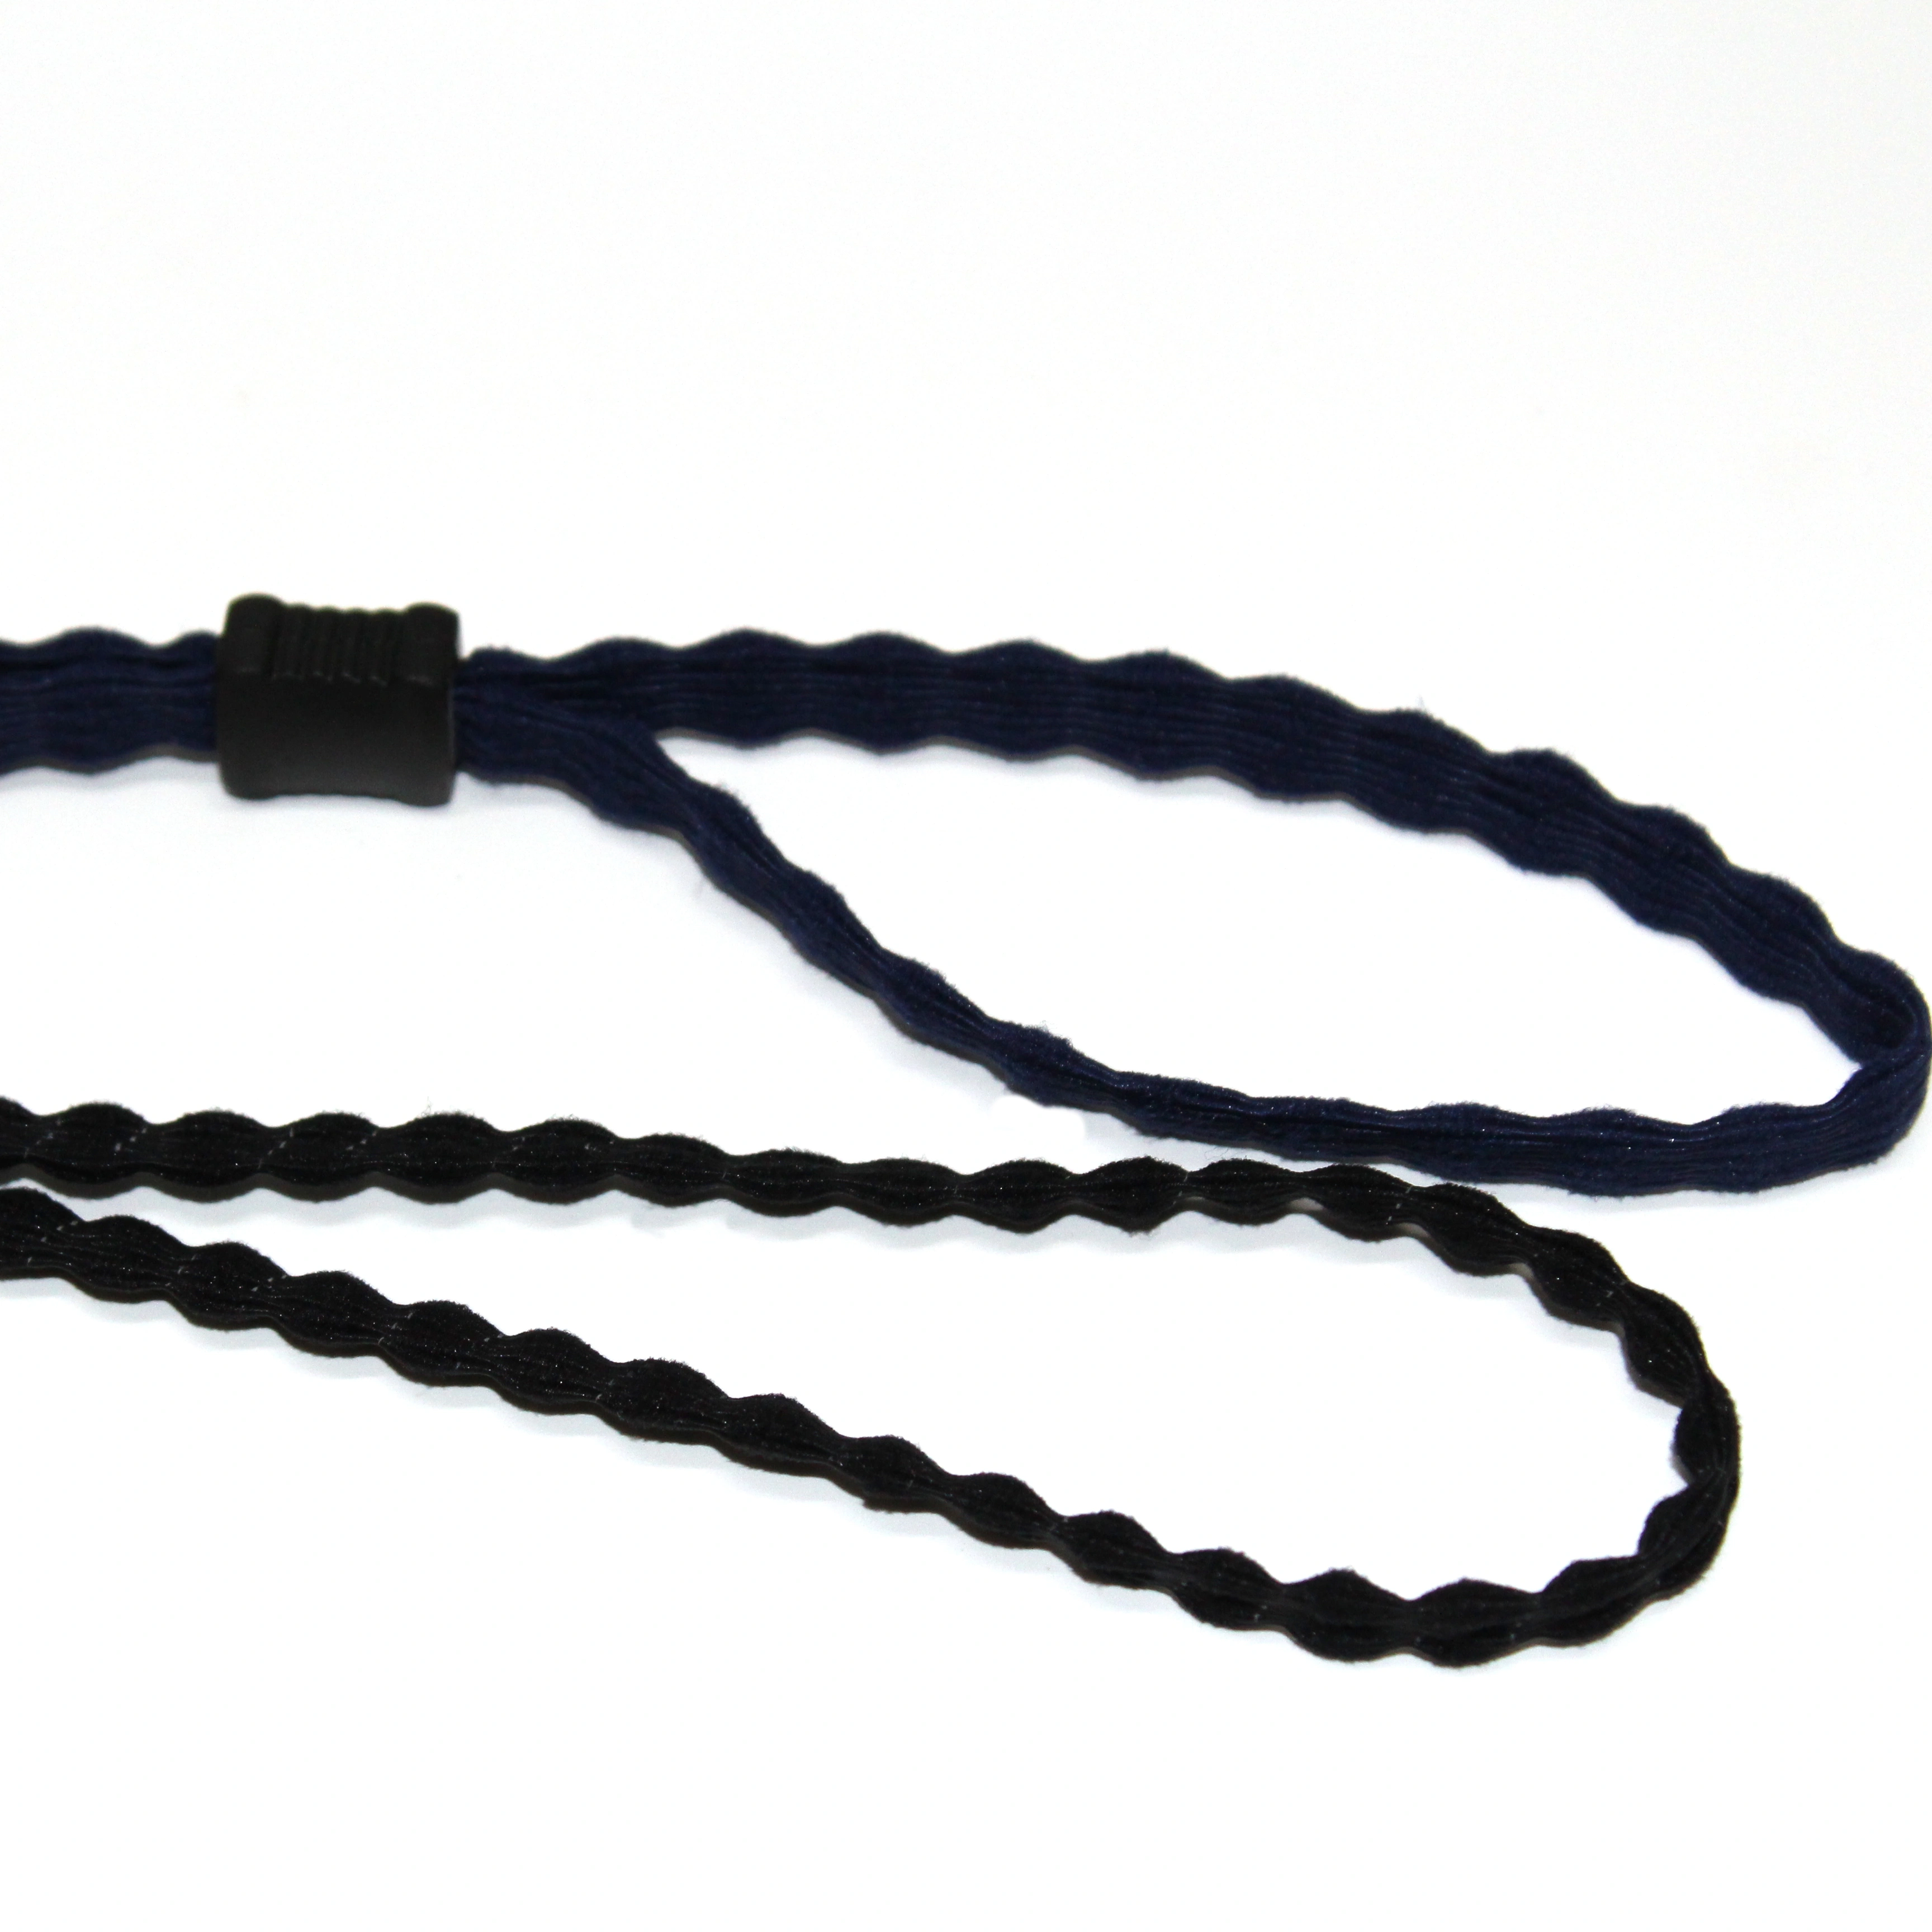 spectacles strap